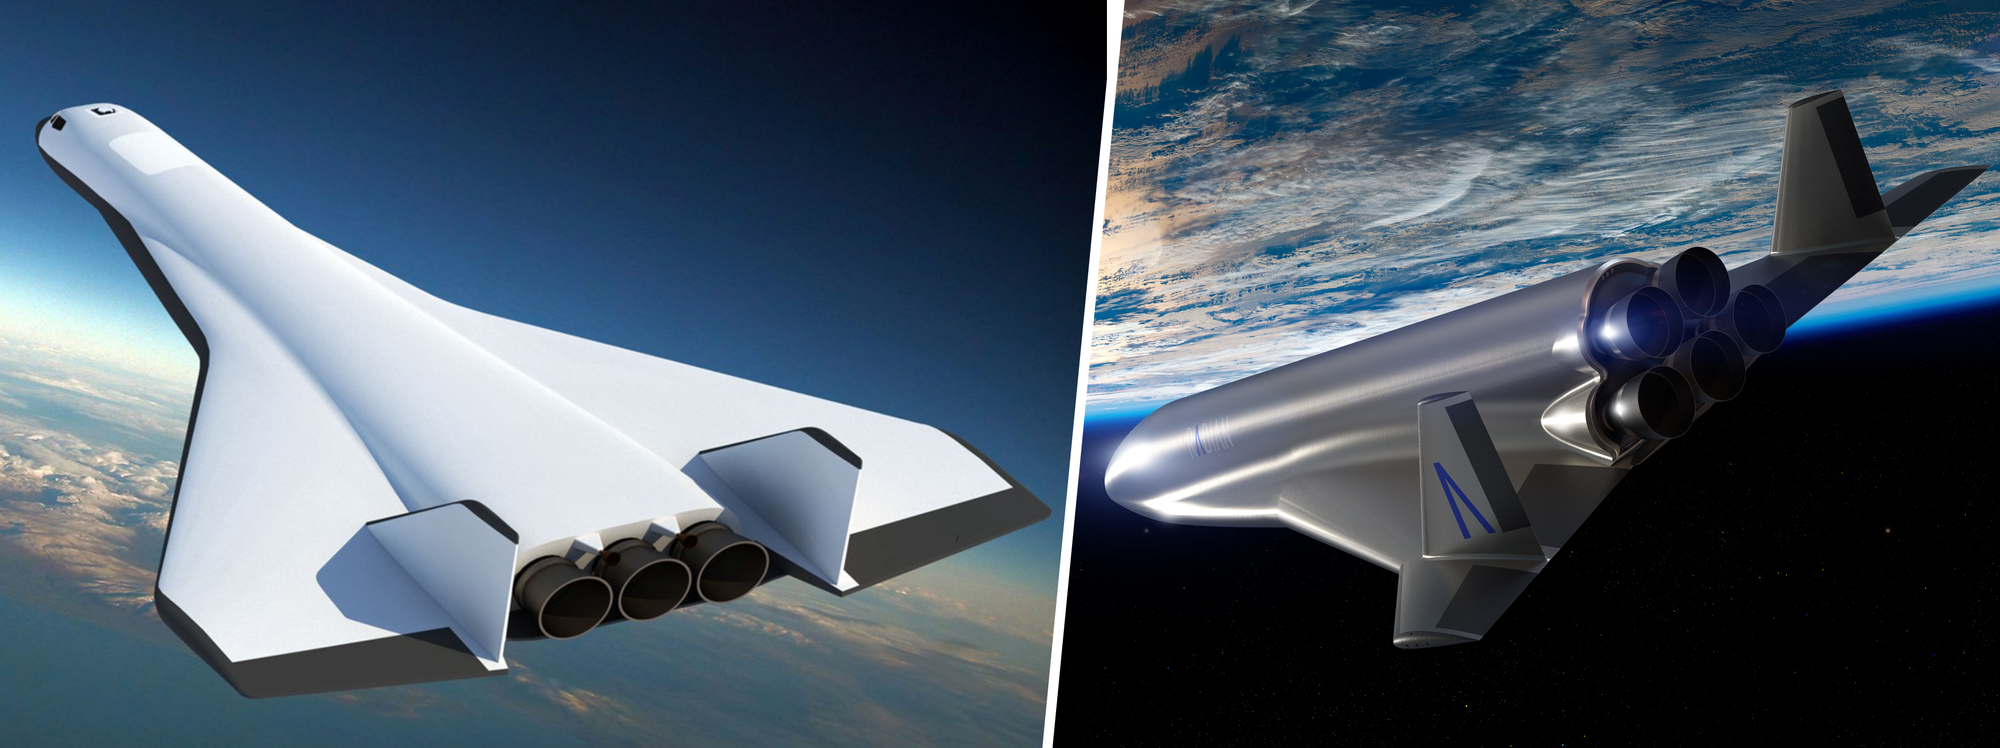 Radian One's 2022 design (left) and Radian One's 2024 design (right). ©Radian Aerospace